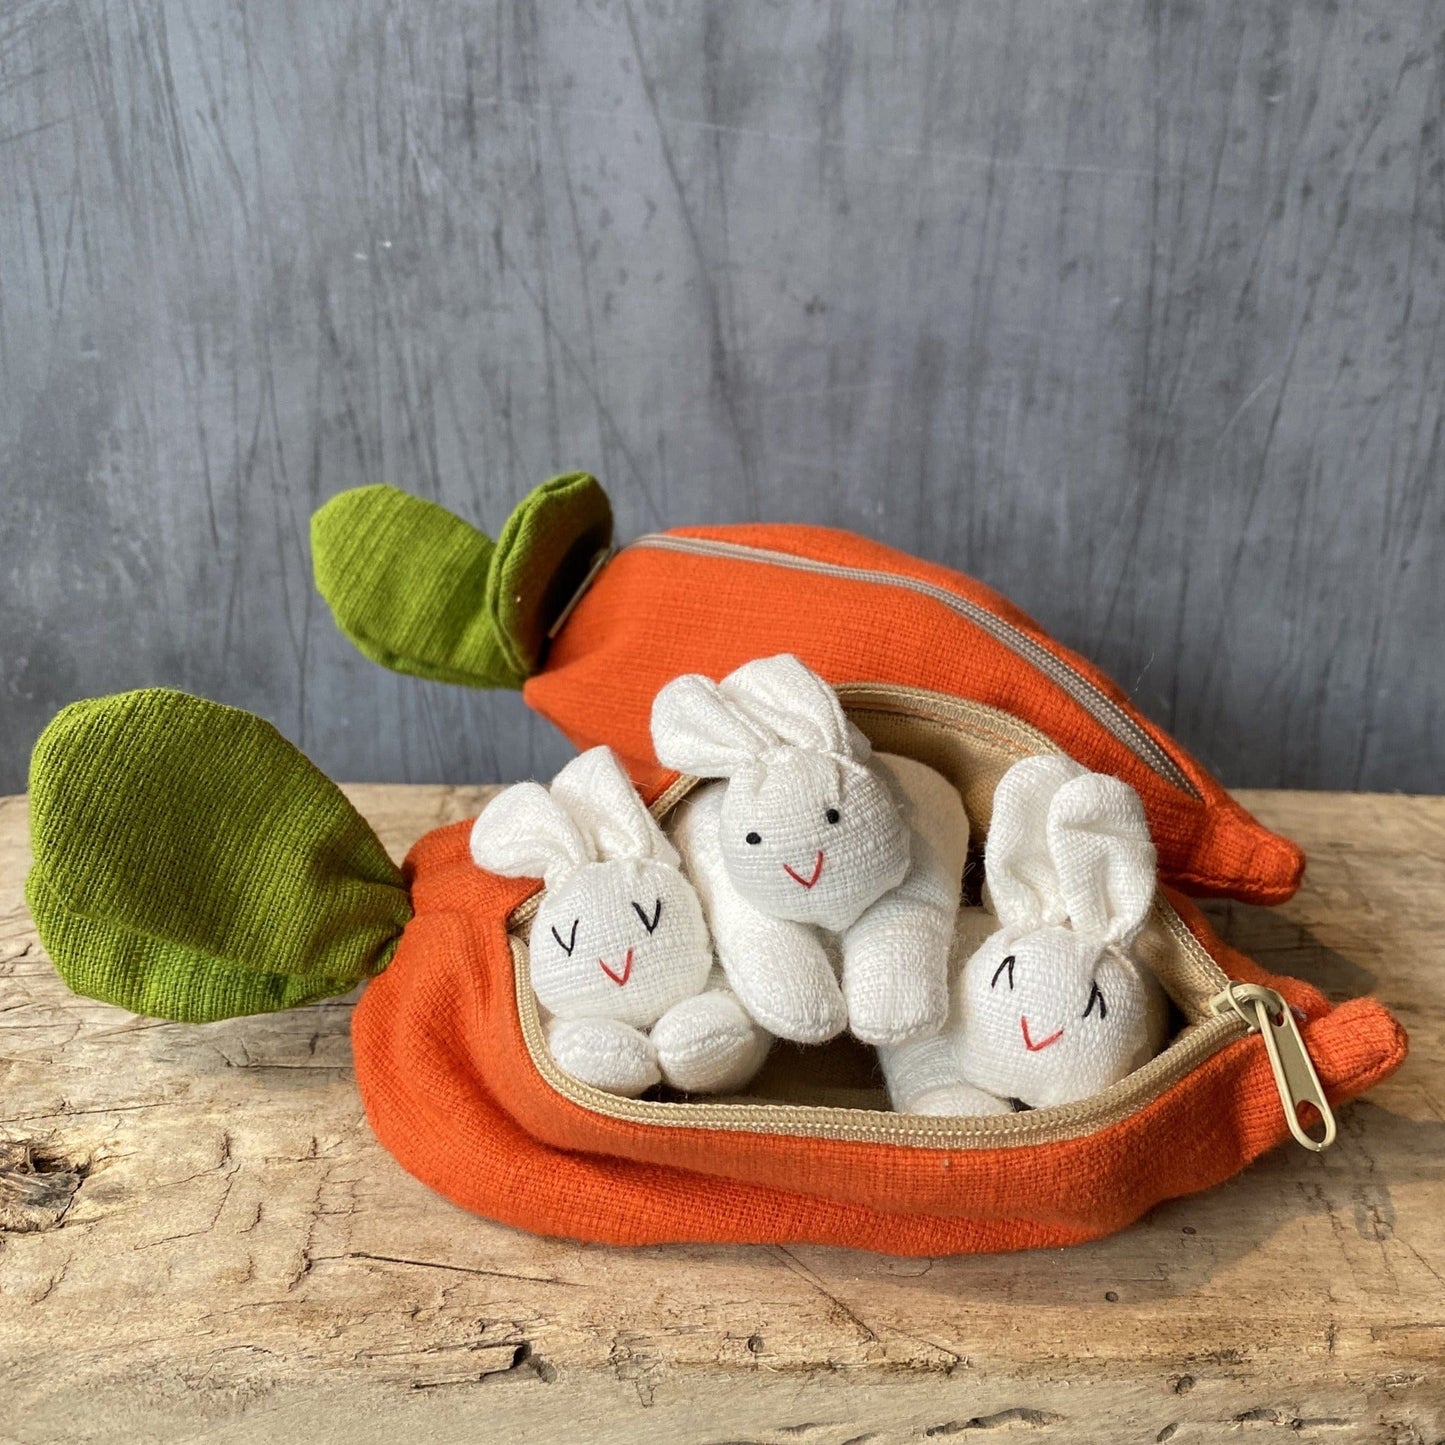 Old Wooden Lady Toys Bunnies in Carrots